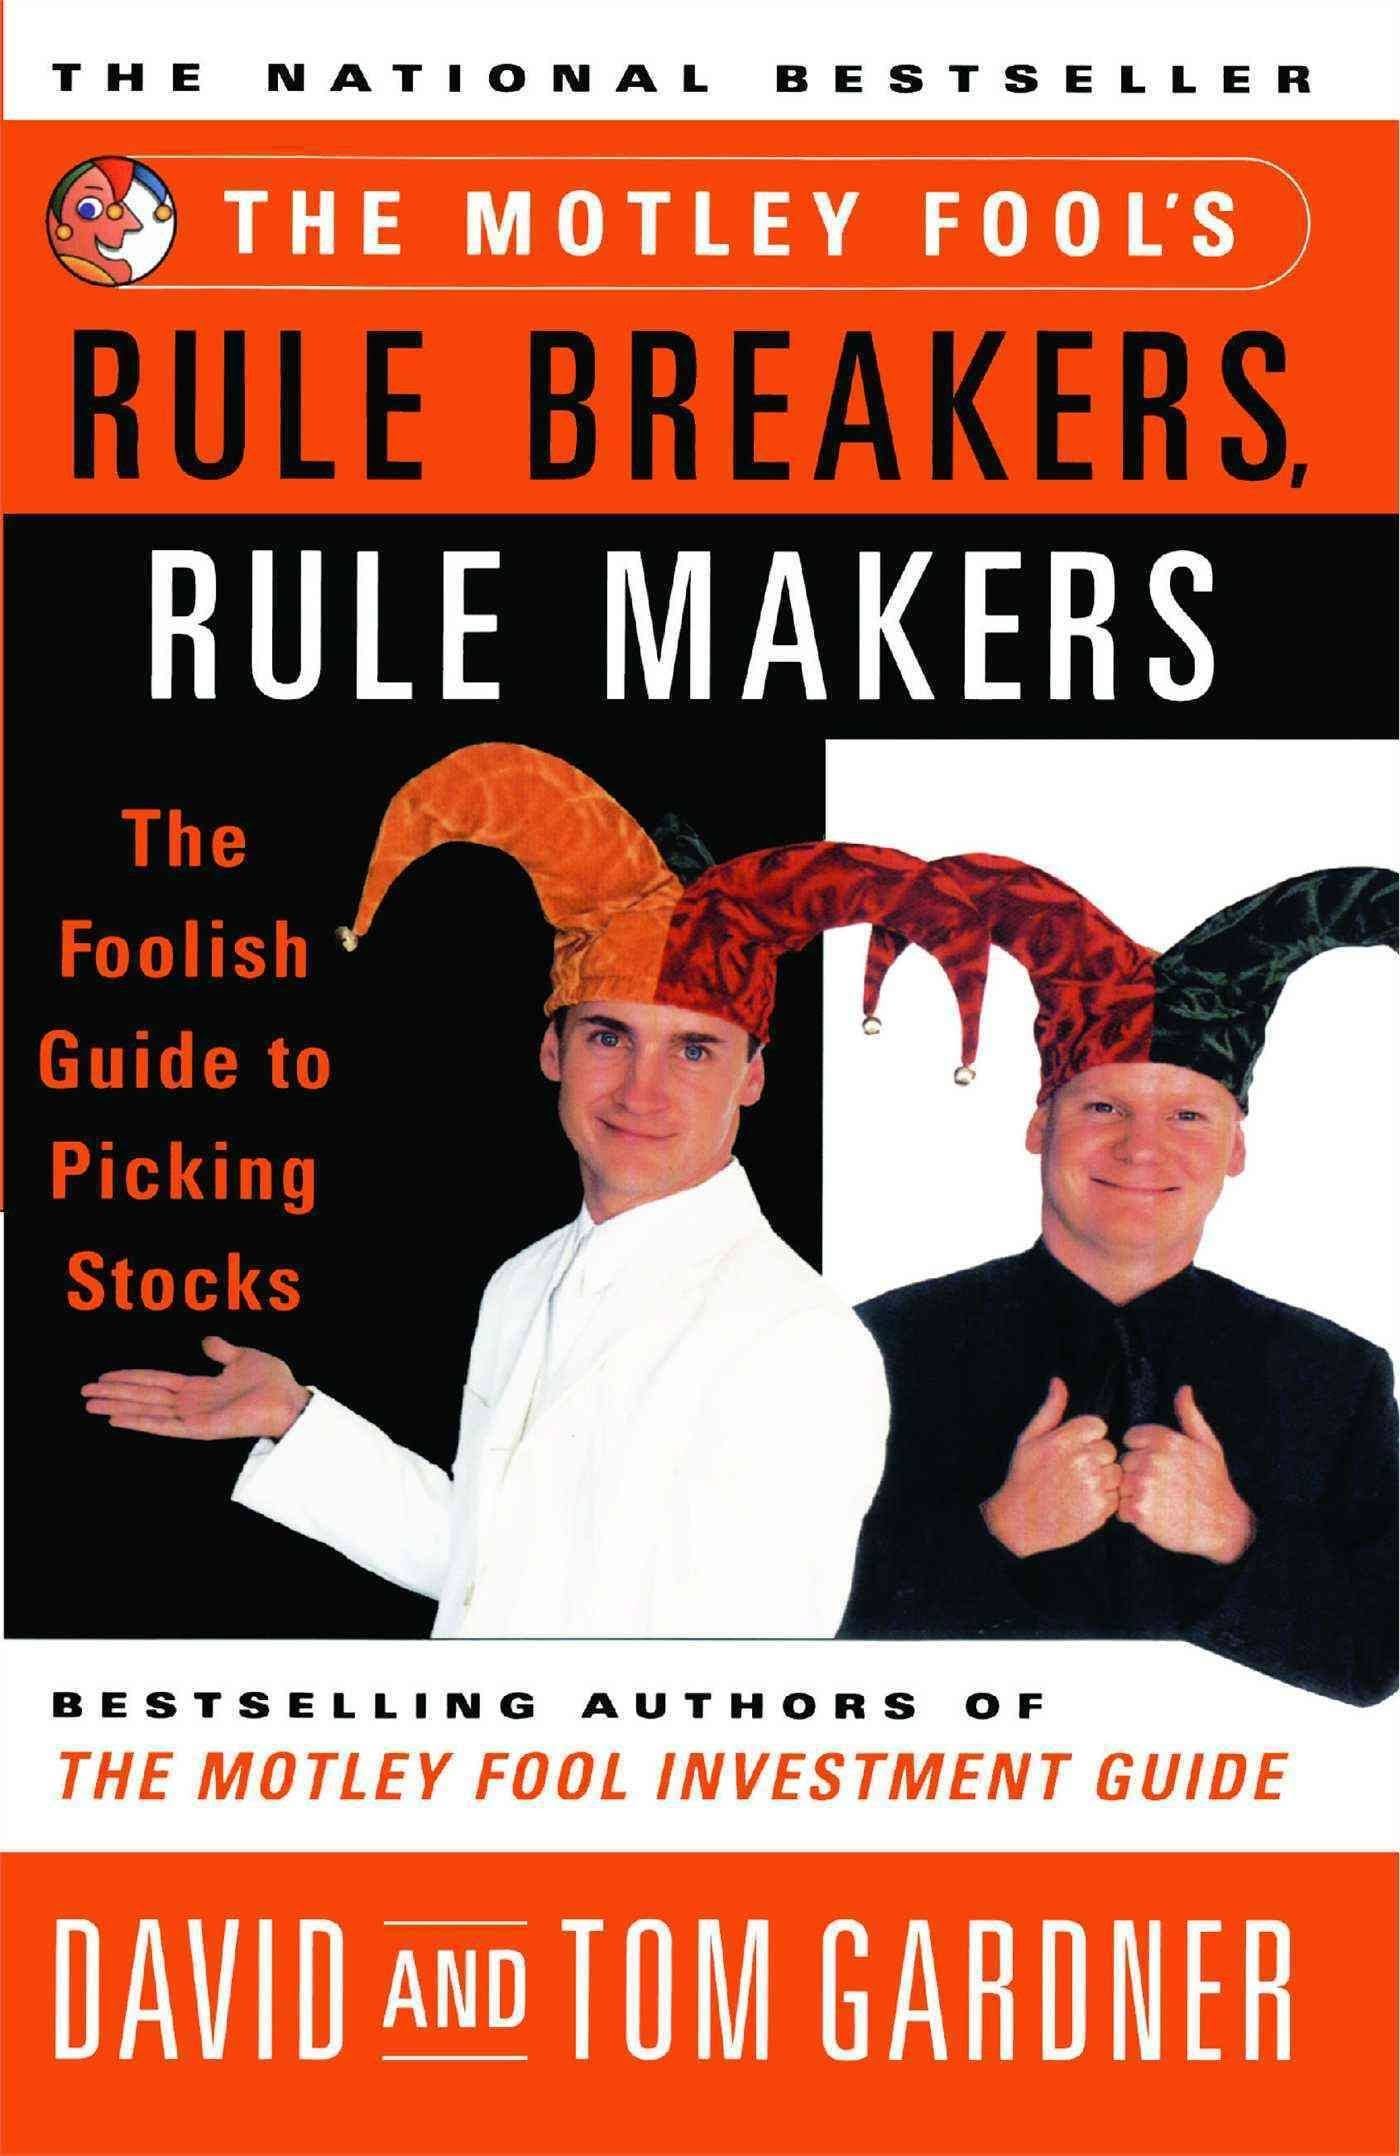 The Motley Fool's Rule Breakers, Rule Makers: The Foolish Guide to Picking Stocks [Book]